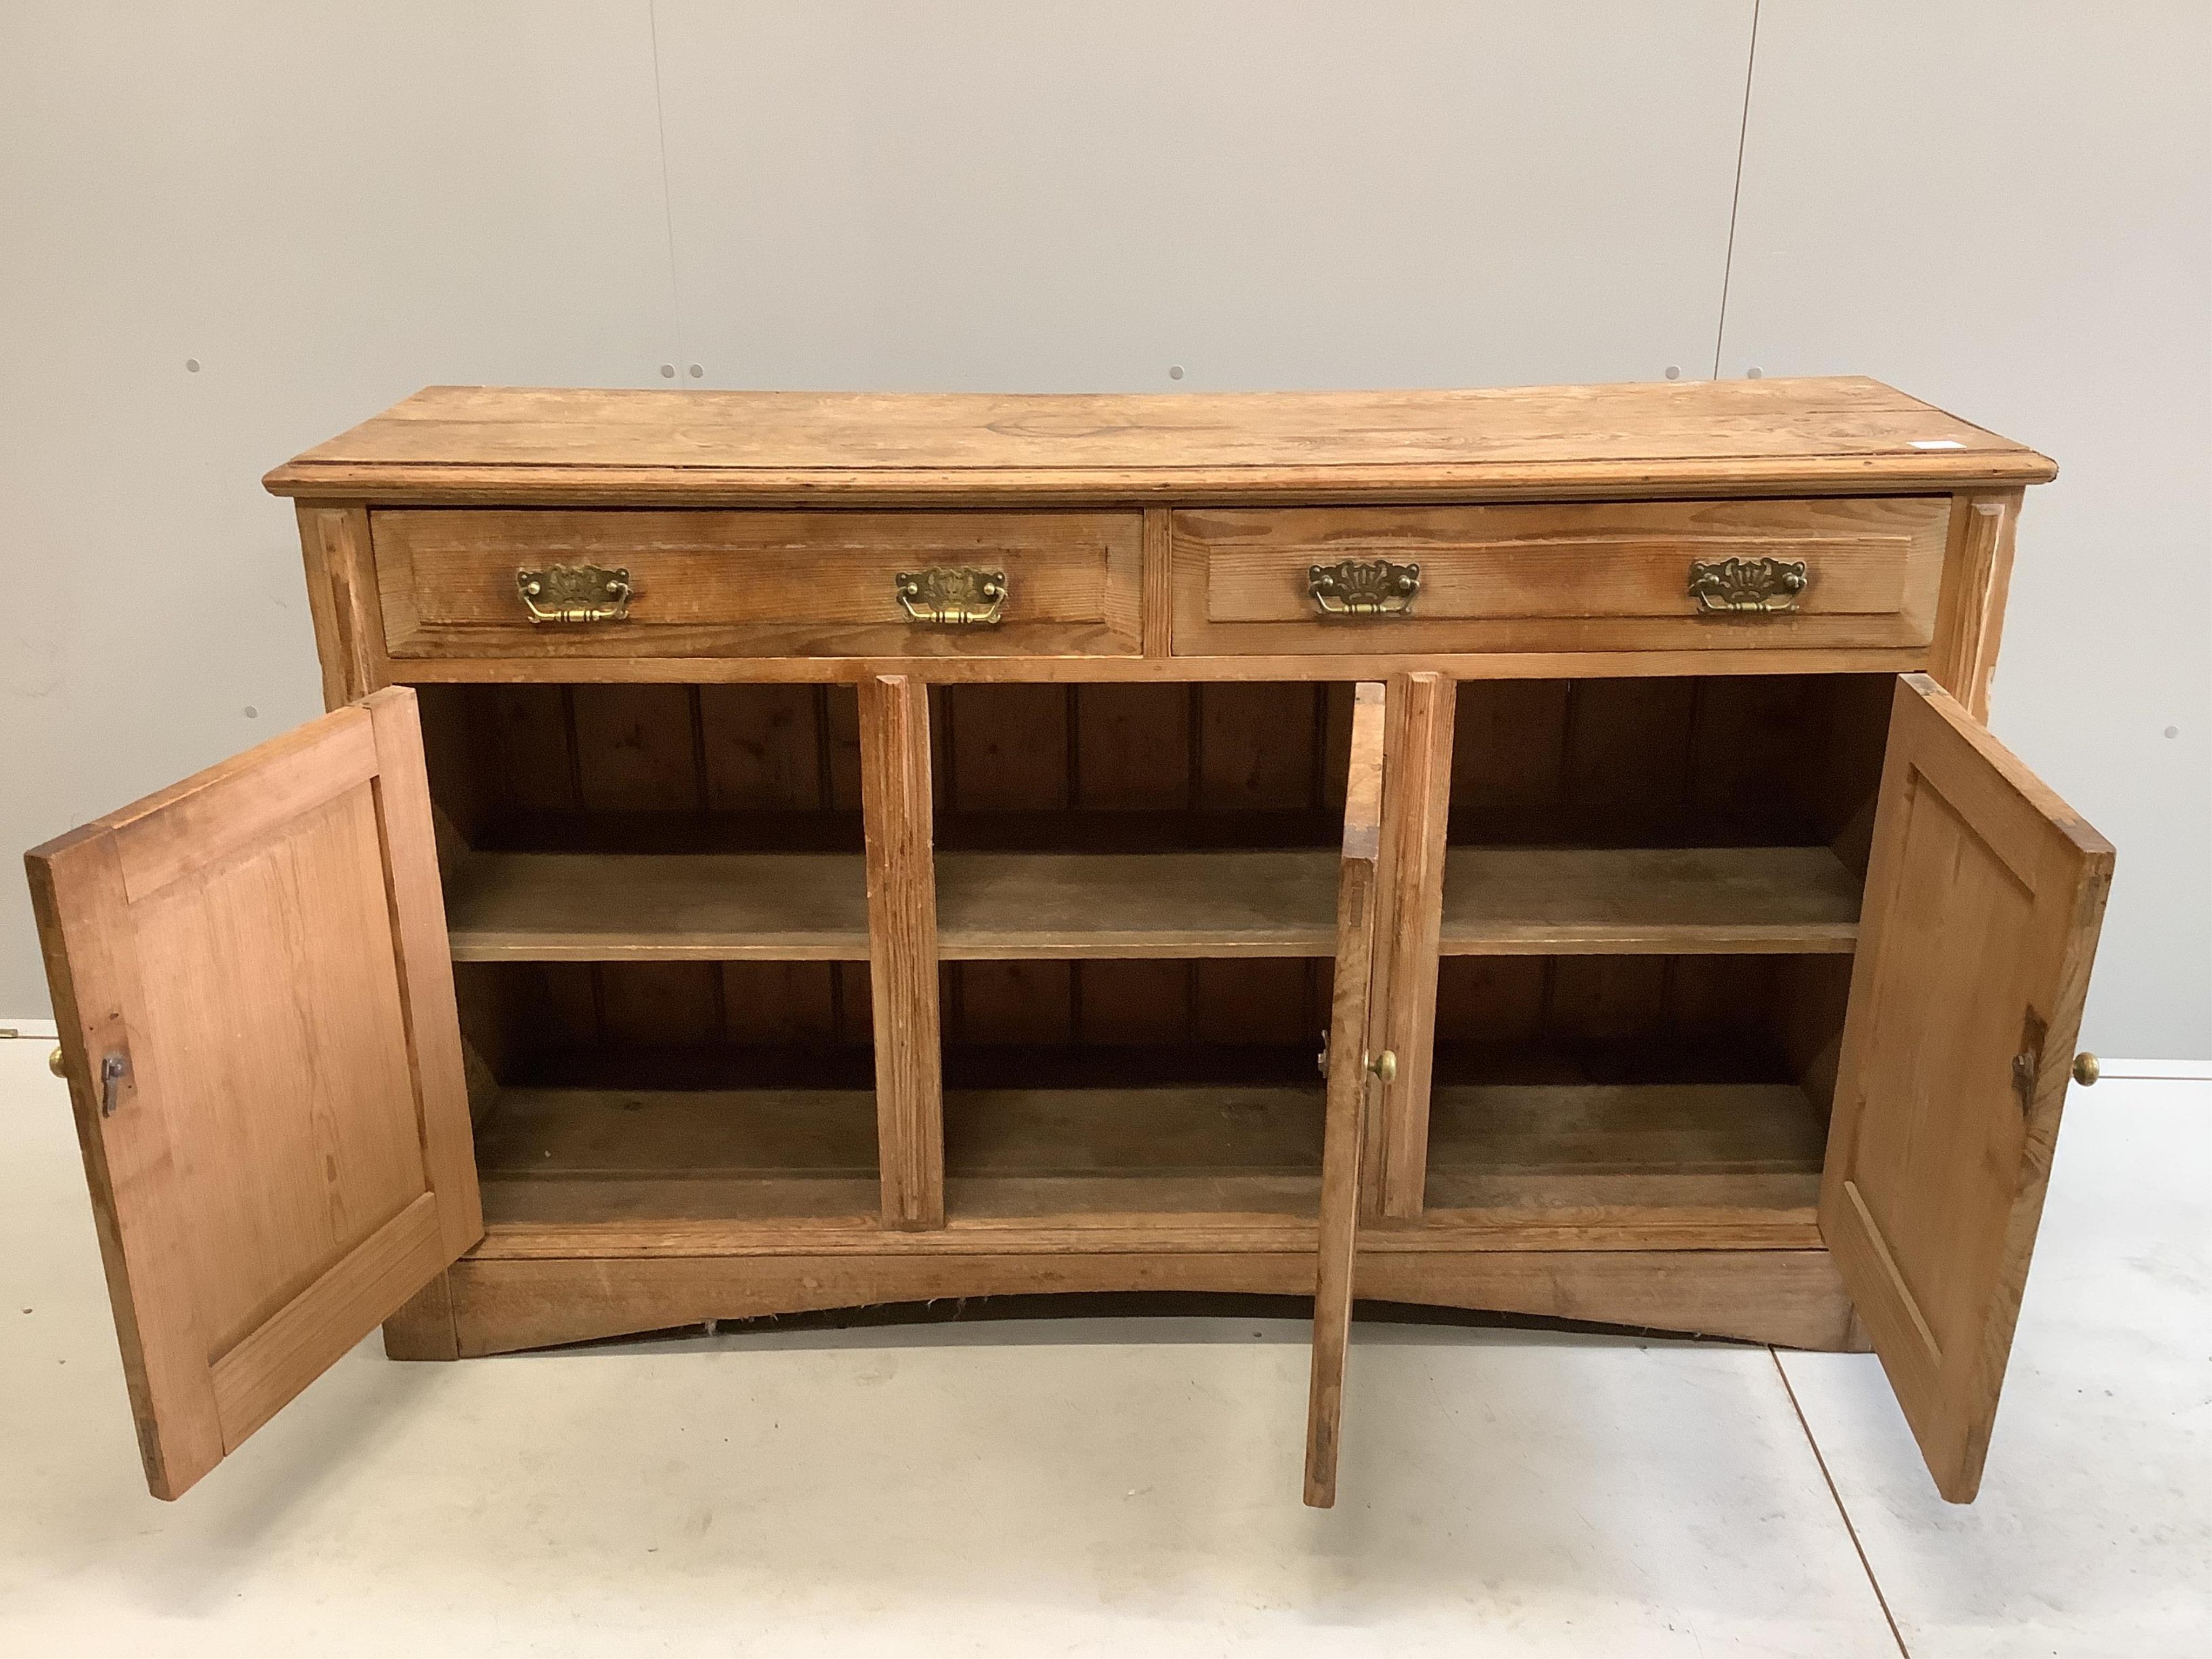 A late Victorian pitch pine low dresser, width 155cm, depth 43cm, height 92cm. Condition - poor